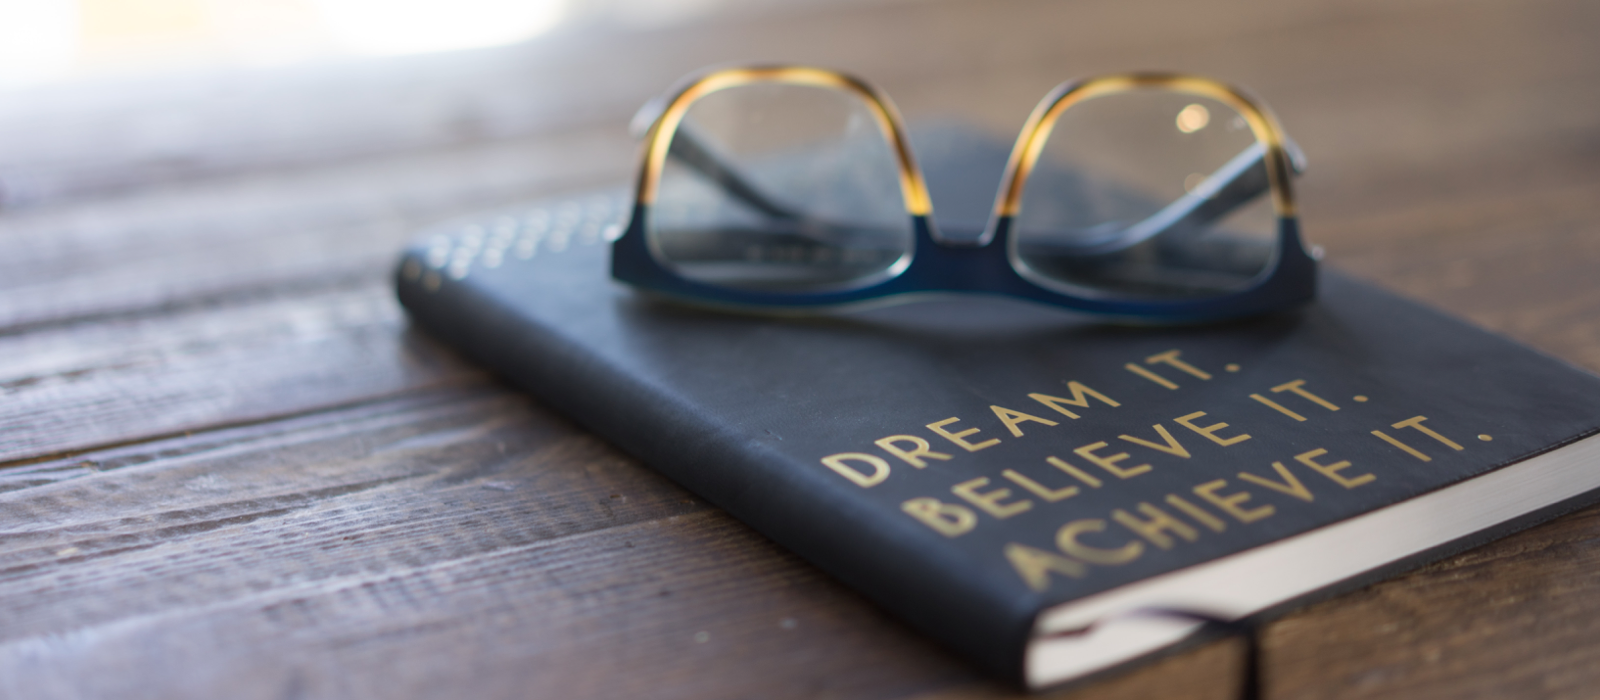 Glass on top of journal reading "Dream it. Believe it. Achieve it." Photo for Unsplash by Carolyn Christine.